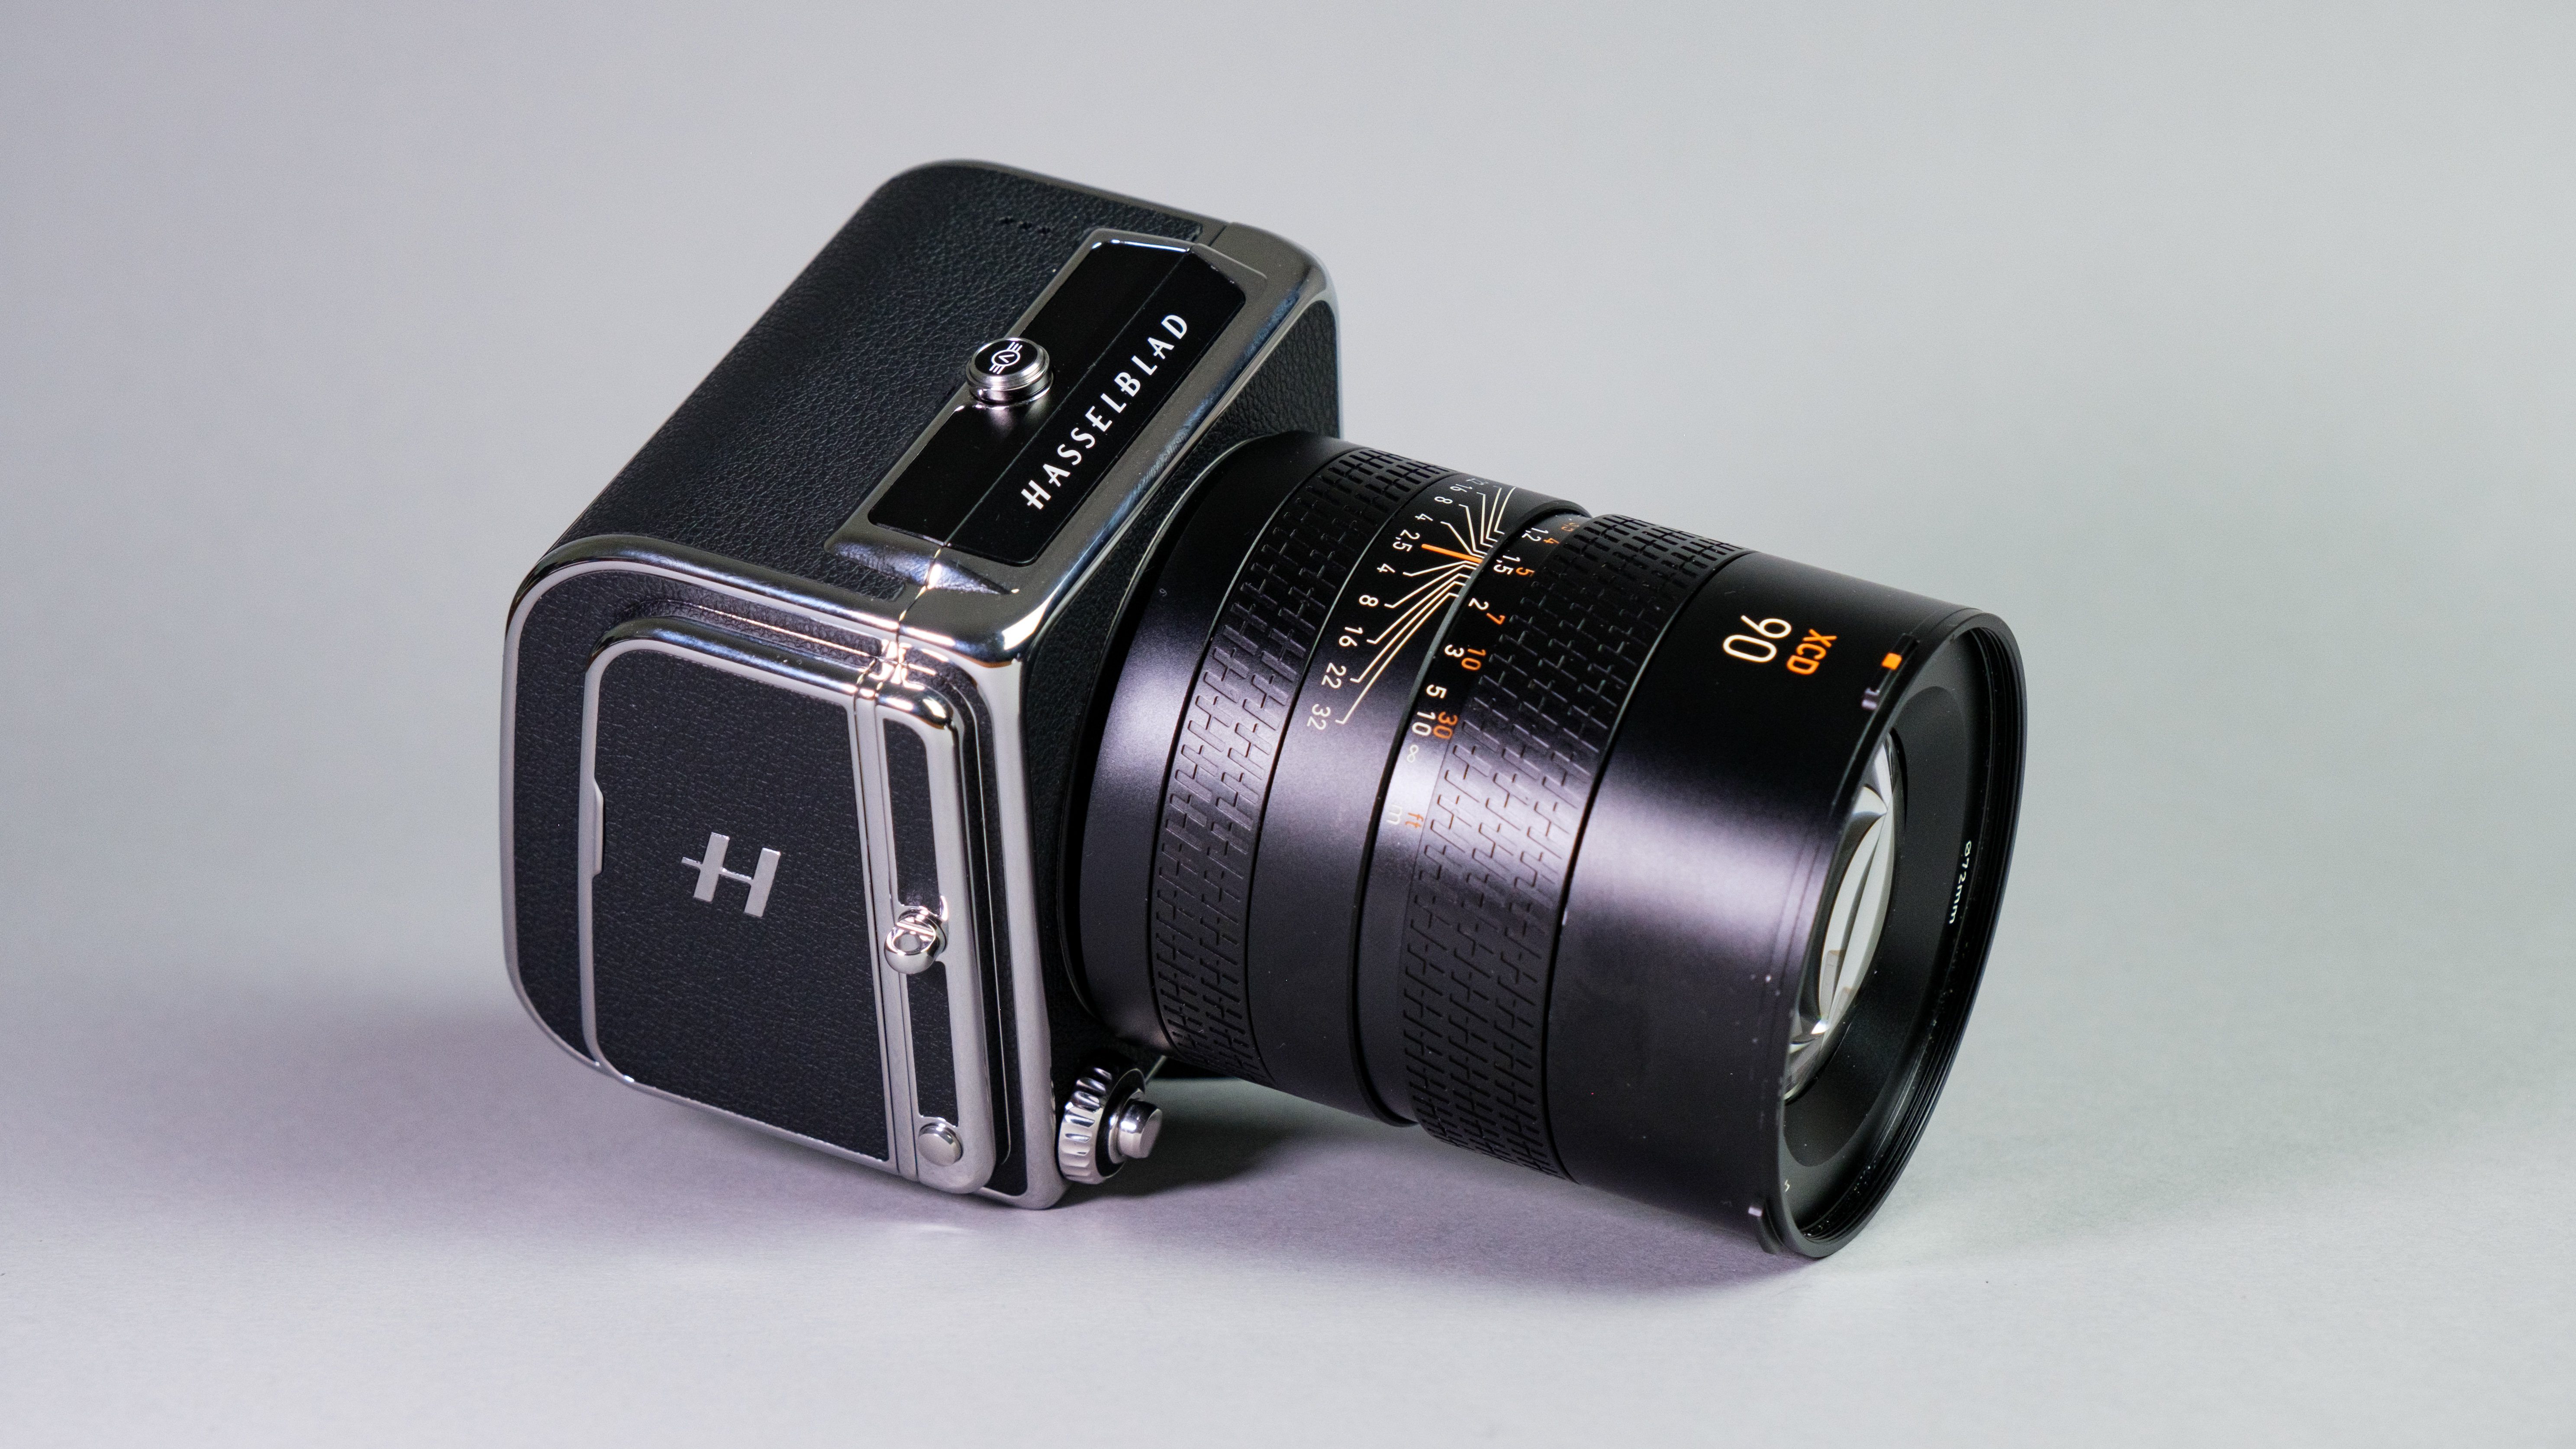 The Hasselblad 907X + CFV 100C against a gray background